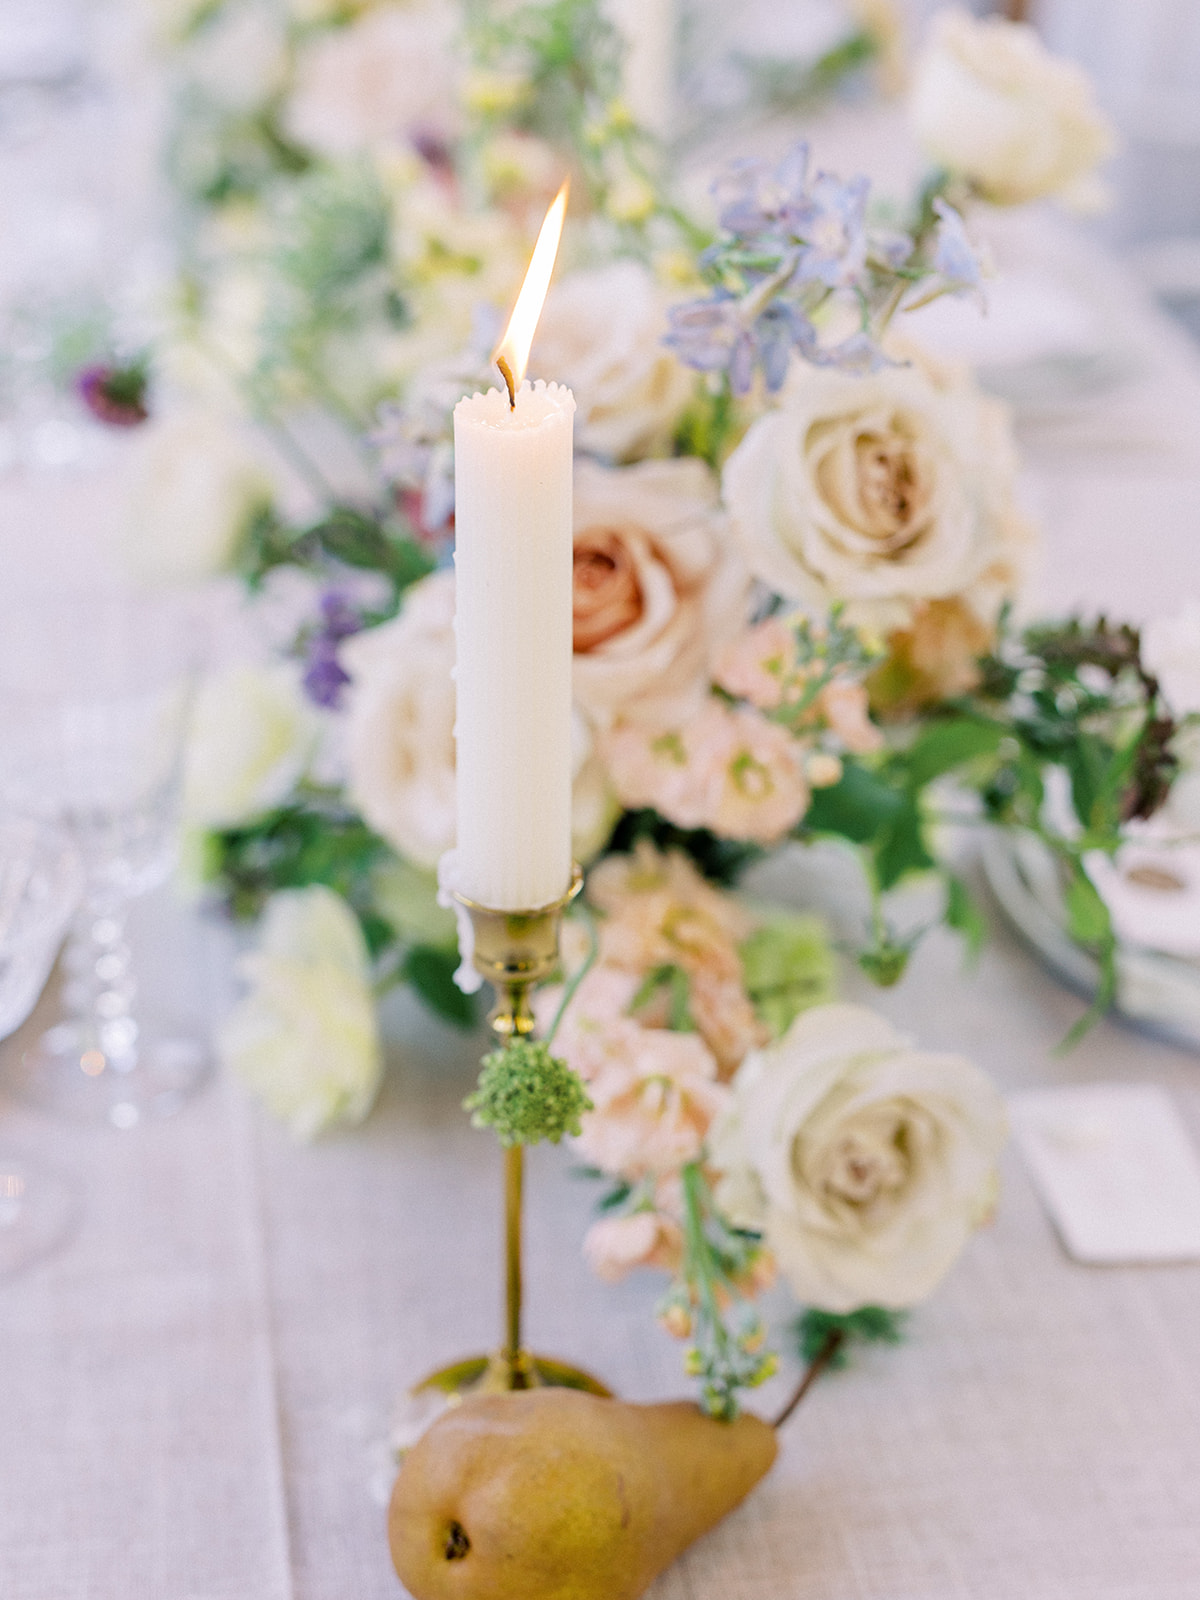 Gorgeous Scottsdale wedding reception table design complete with fresh florals, dripping candles & fruit